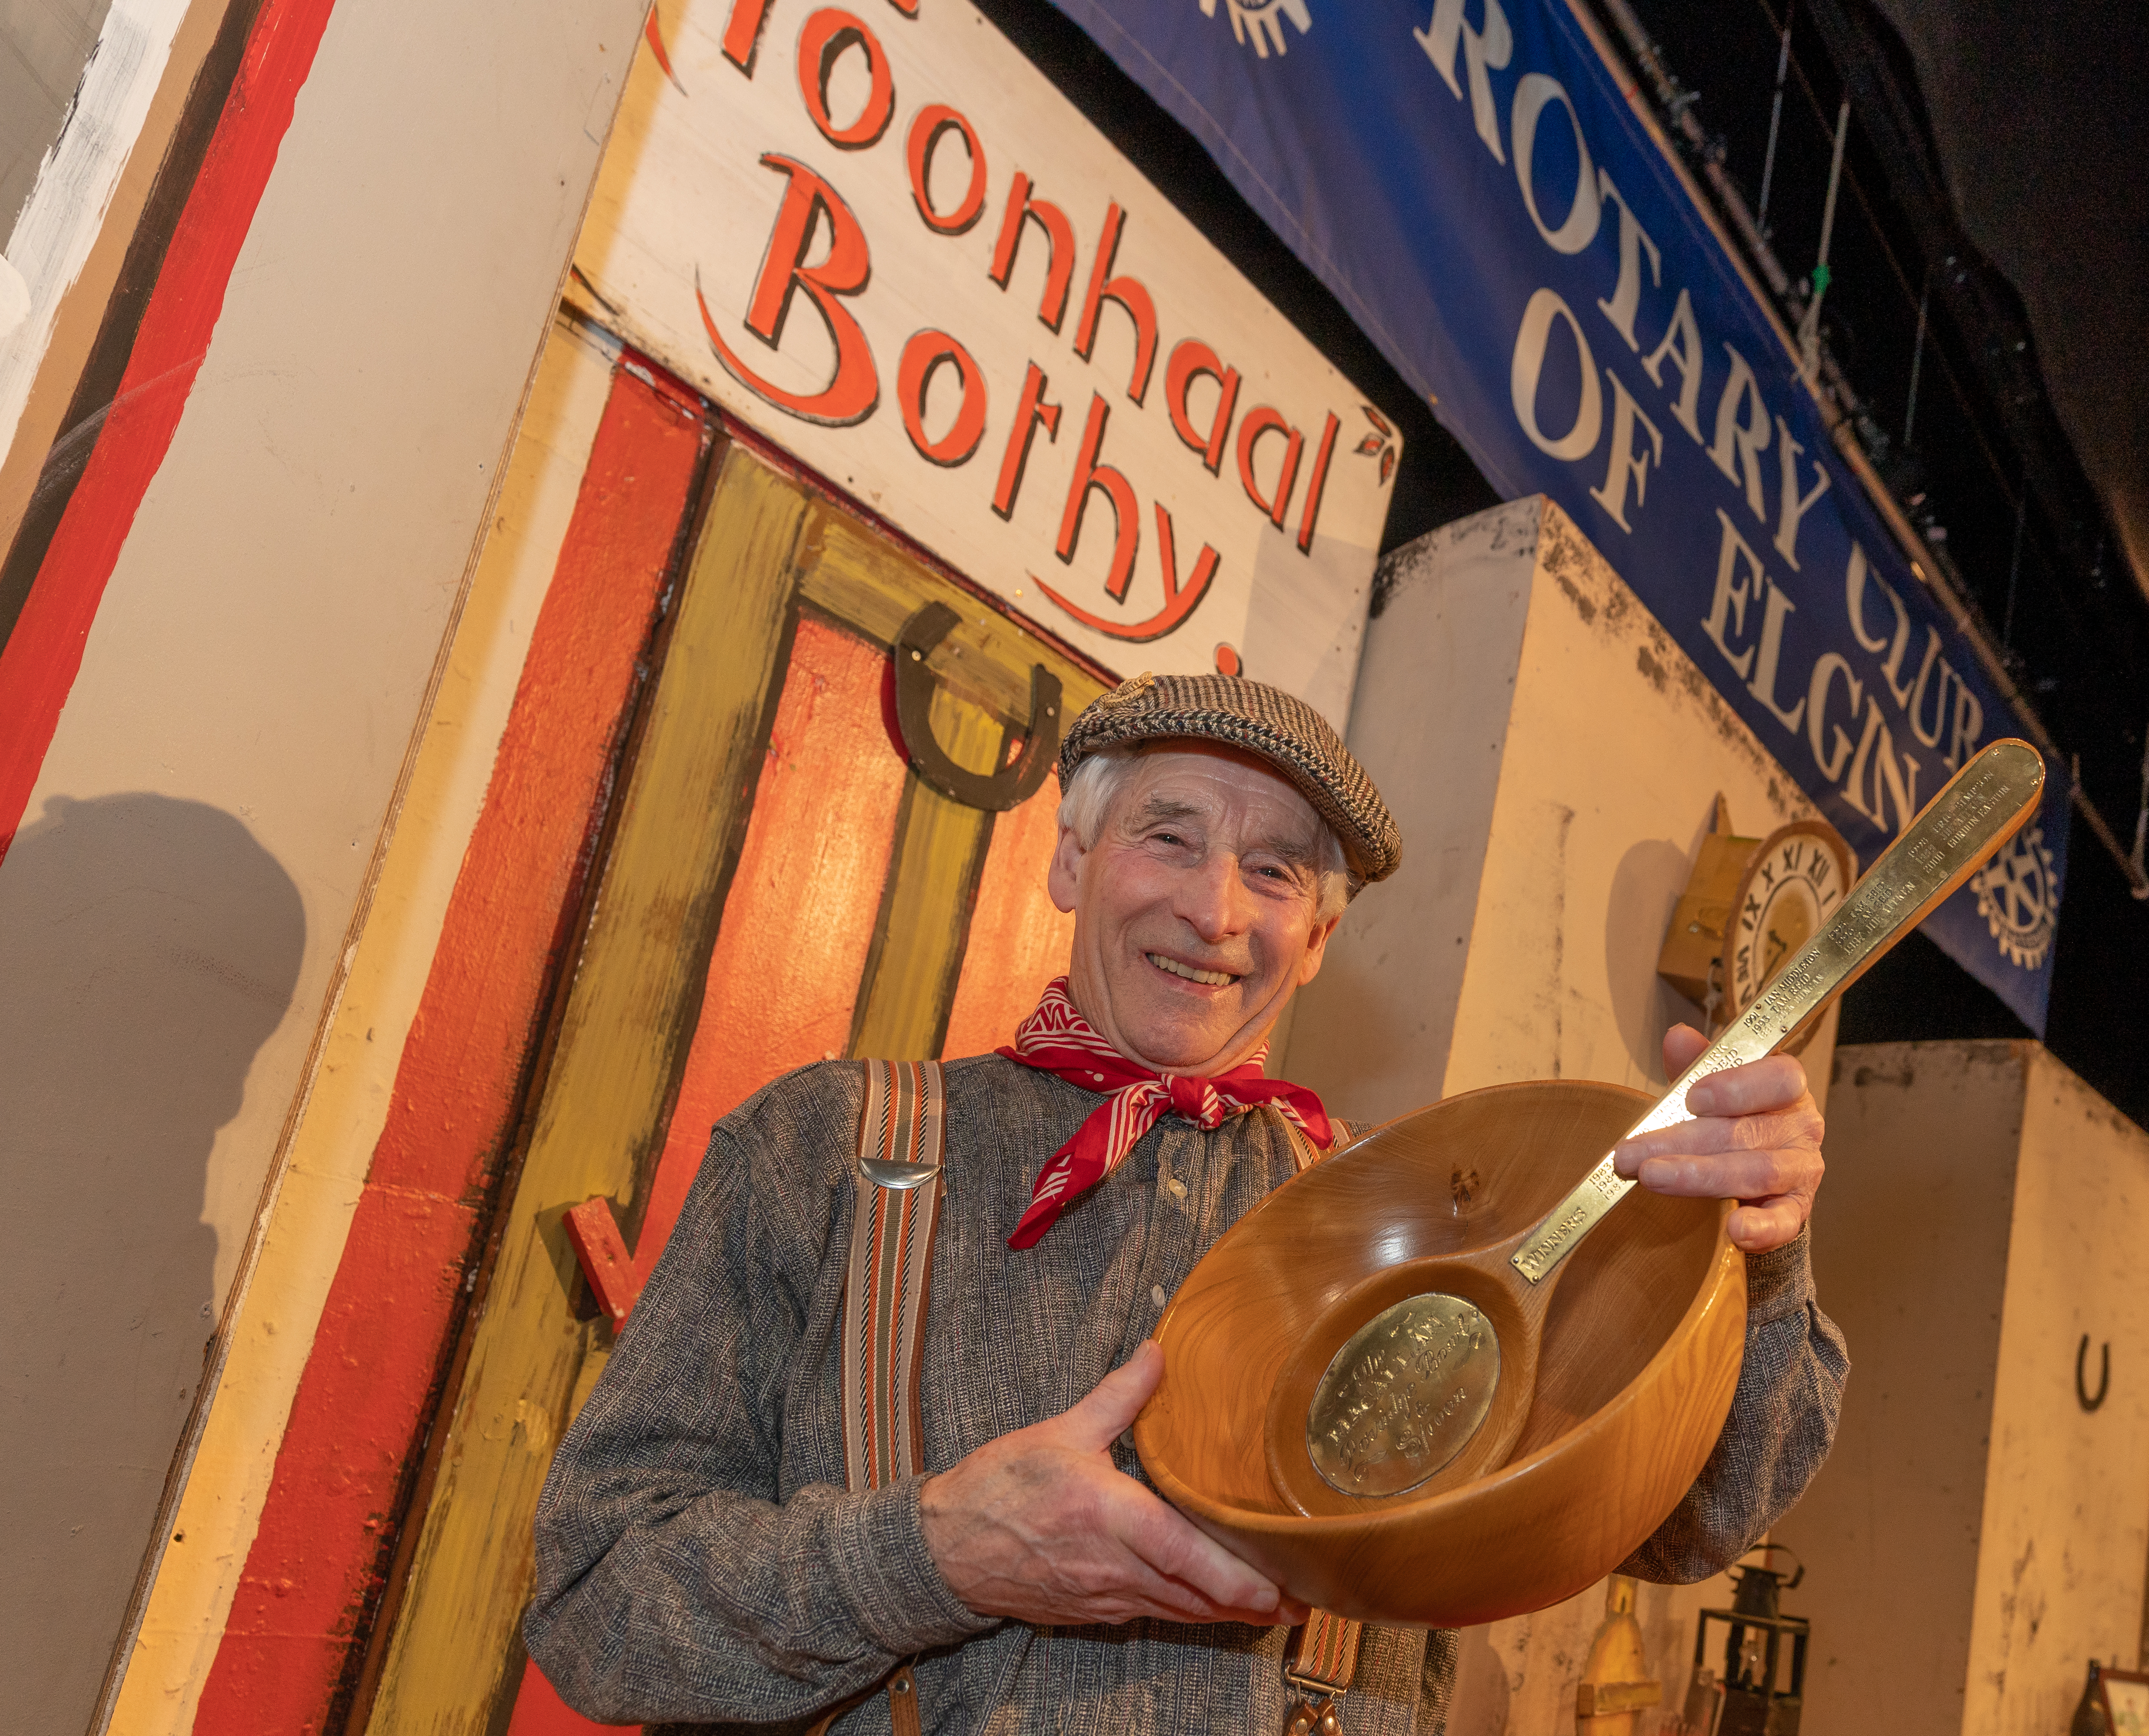 Hector Riddell won the 37th bothy ballads celebration at Elgin Town Hall.